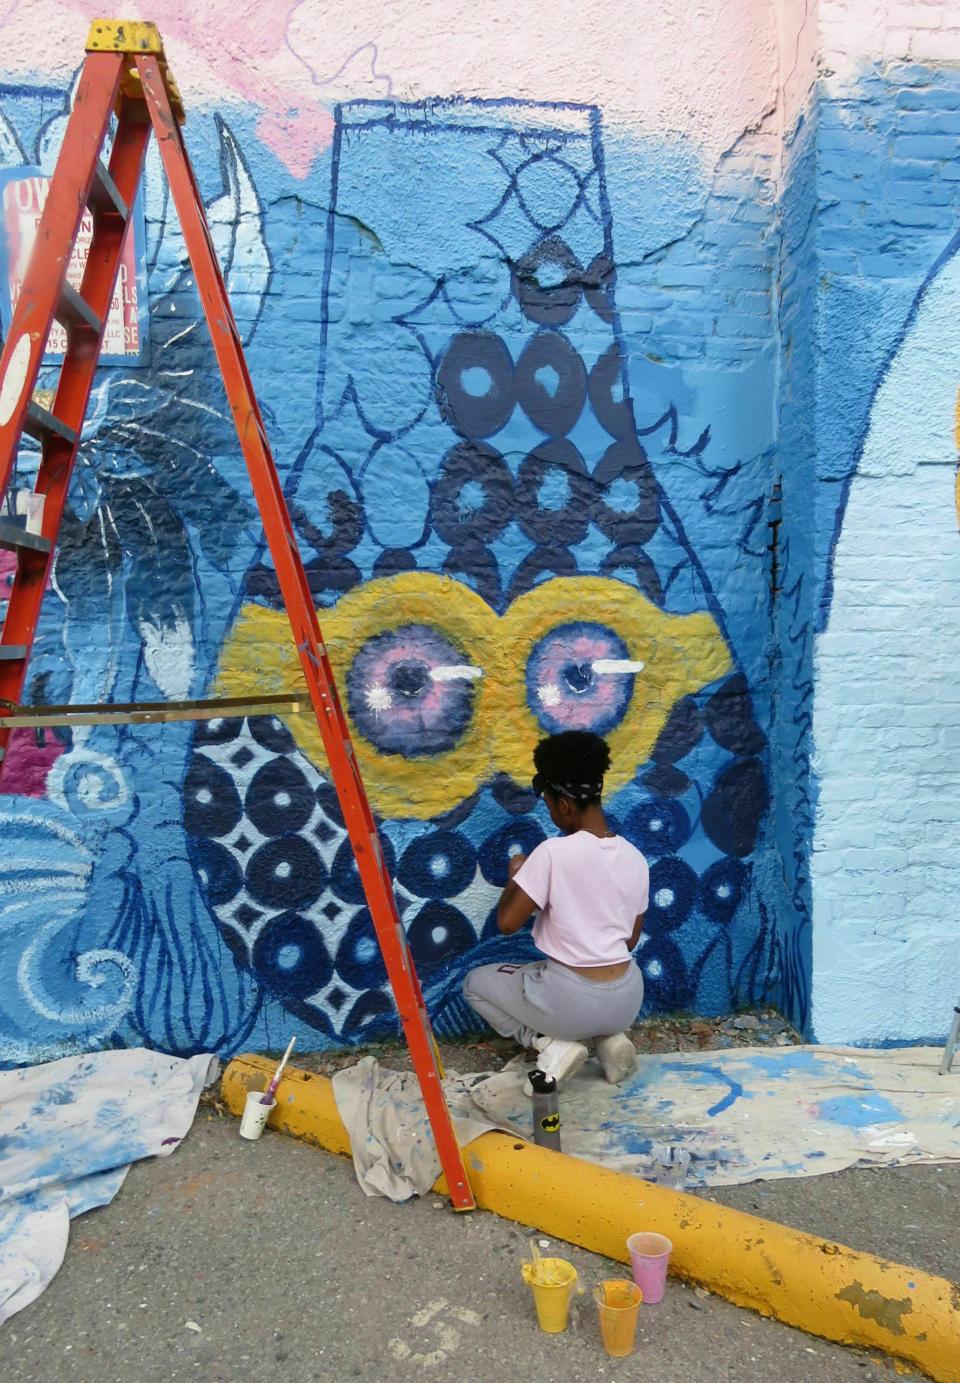 In this Thursday, May 30, 2019 photo, Shanti Broom works on a detail of the gorud-shaped fish she created as the capital letter I in the word "SURVIVE" for a mural by Brandon "BMike" Odoms and students from the Young Artist Movement in downtown New Orleans. The mural is one of five created as part of an Arts Council of New Orleans project called "Unframed." The council's executive director, Heidi Schmalbach, says the group wants New Orleans to be known for its contemporary art as much as for its music, food and culture. (AP Photo/Janet McConnaughey)